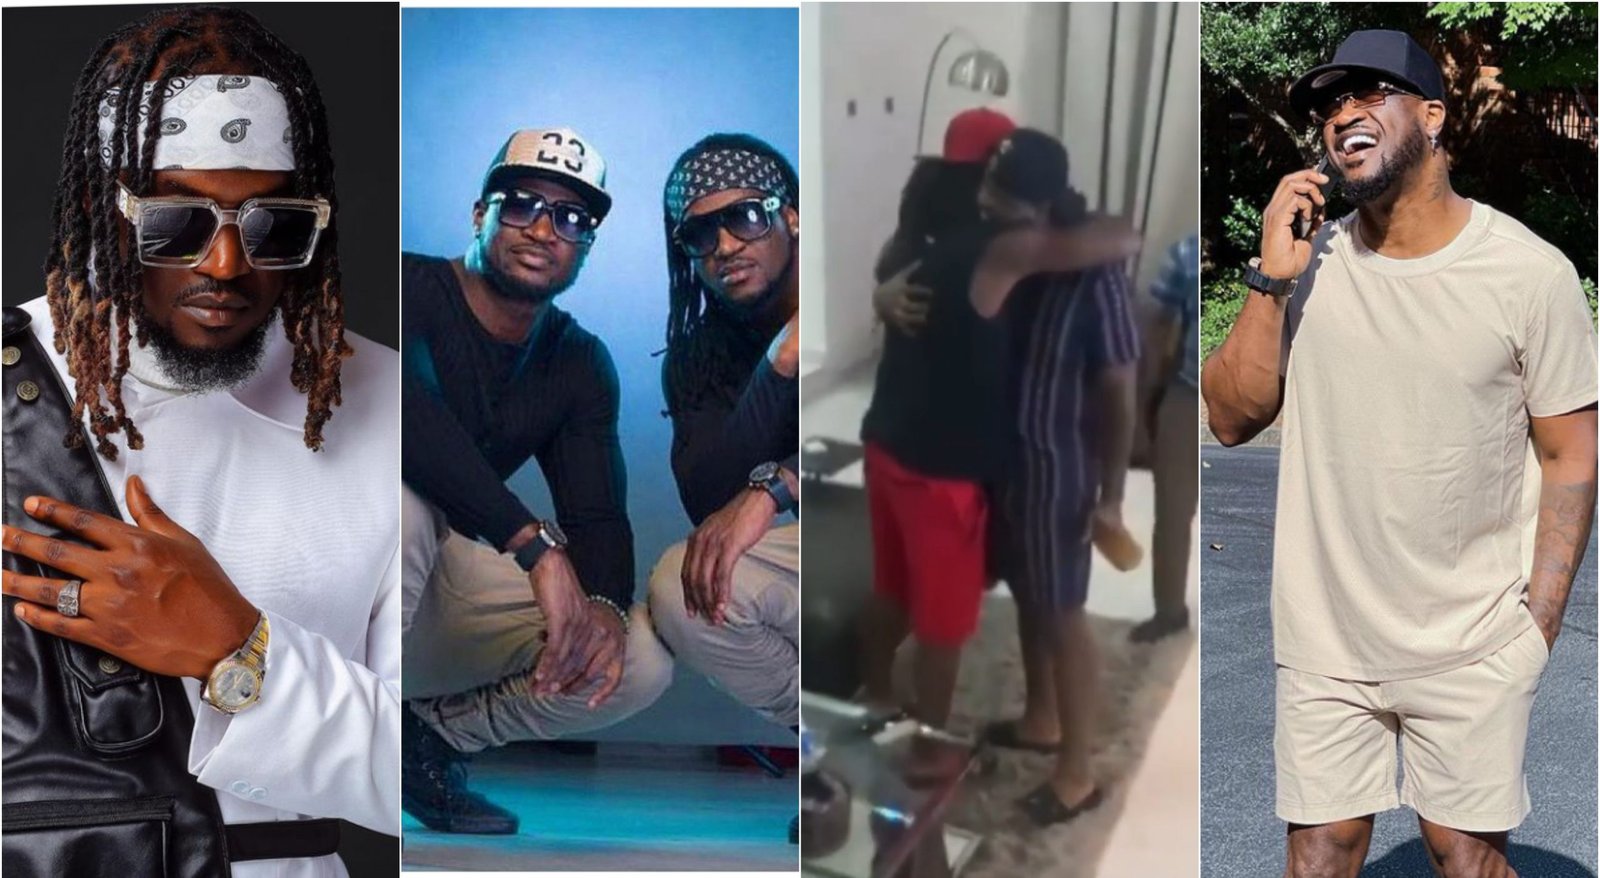 P-Square: “Happy birthday to us” – Peter and Paul celebrate first birthday together after years apart (Video)